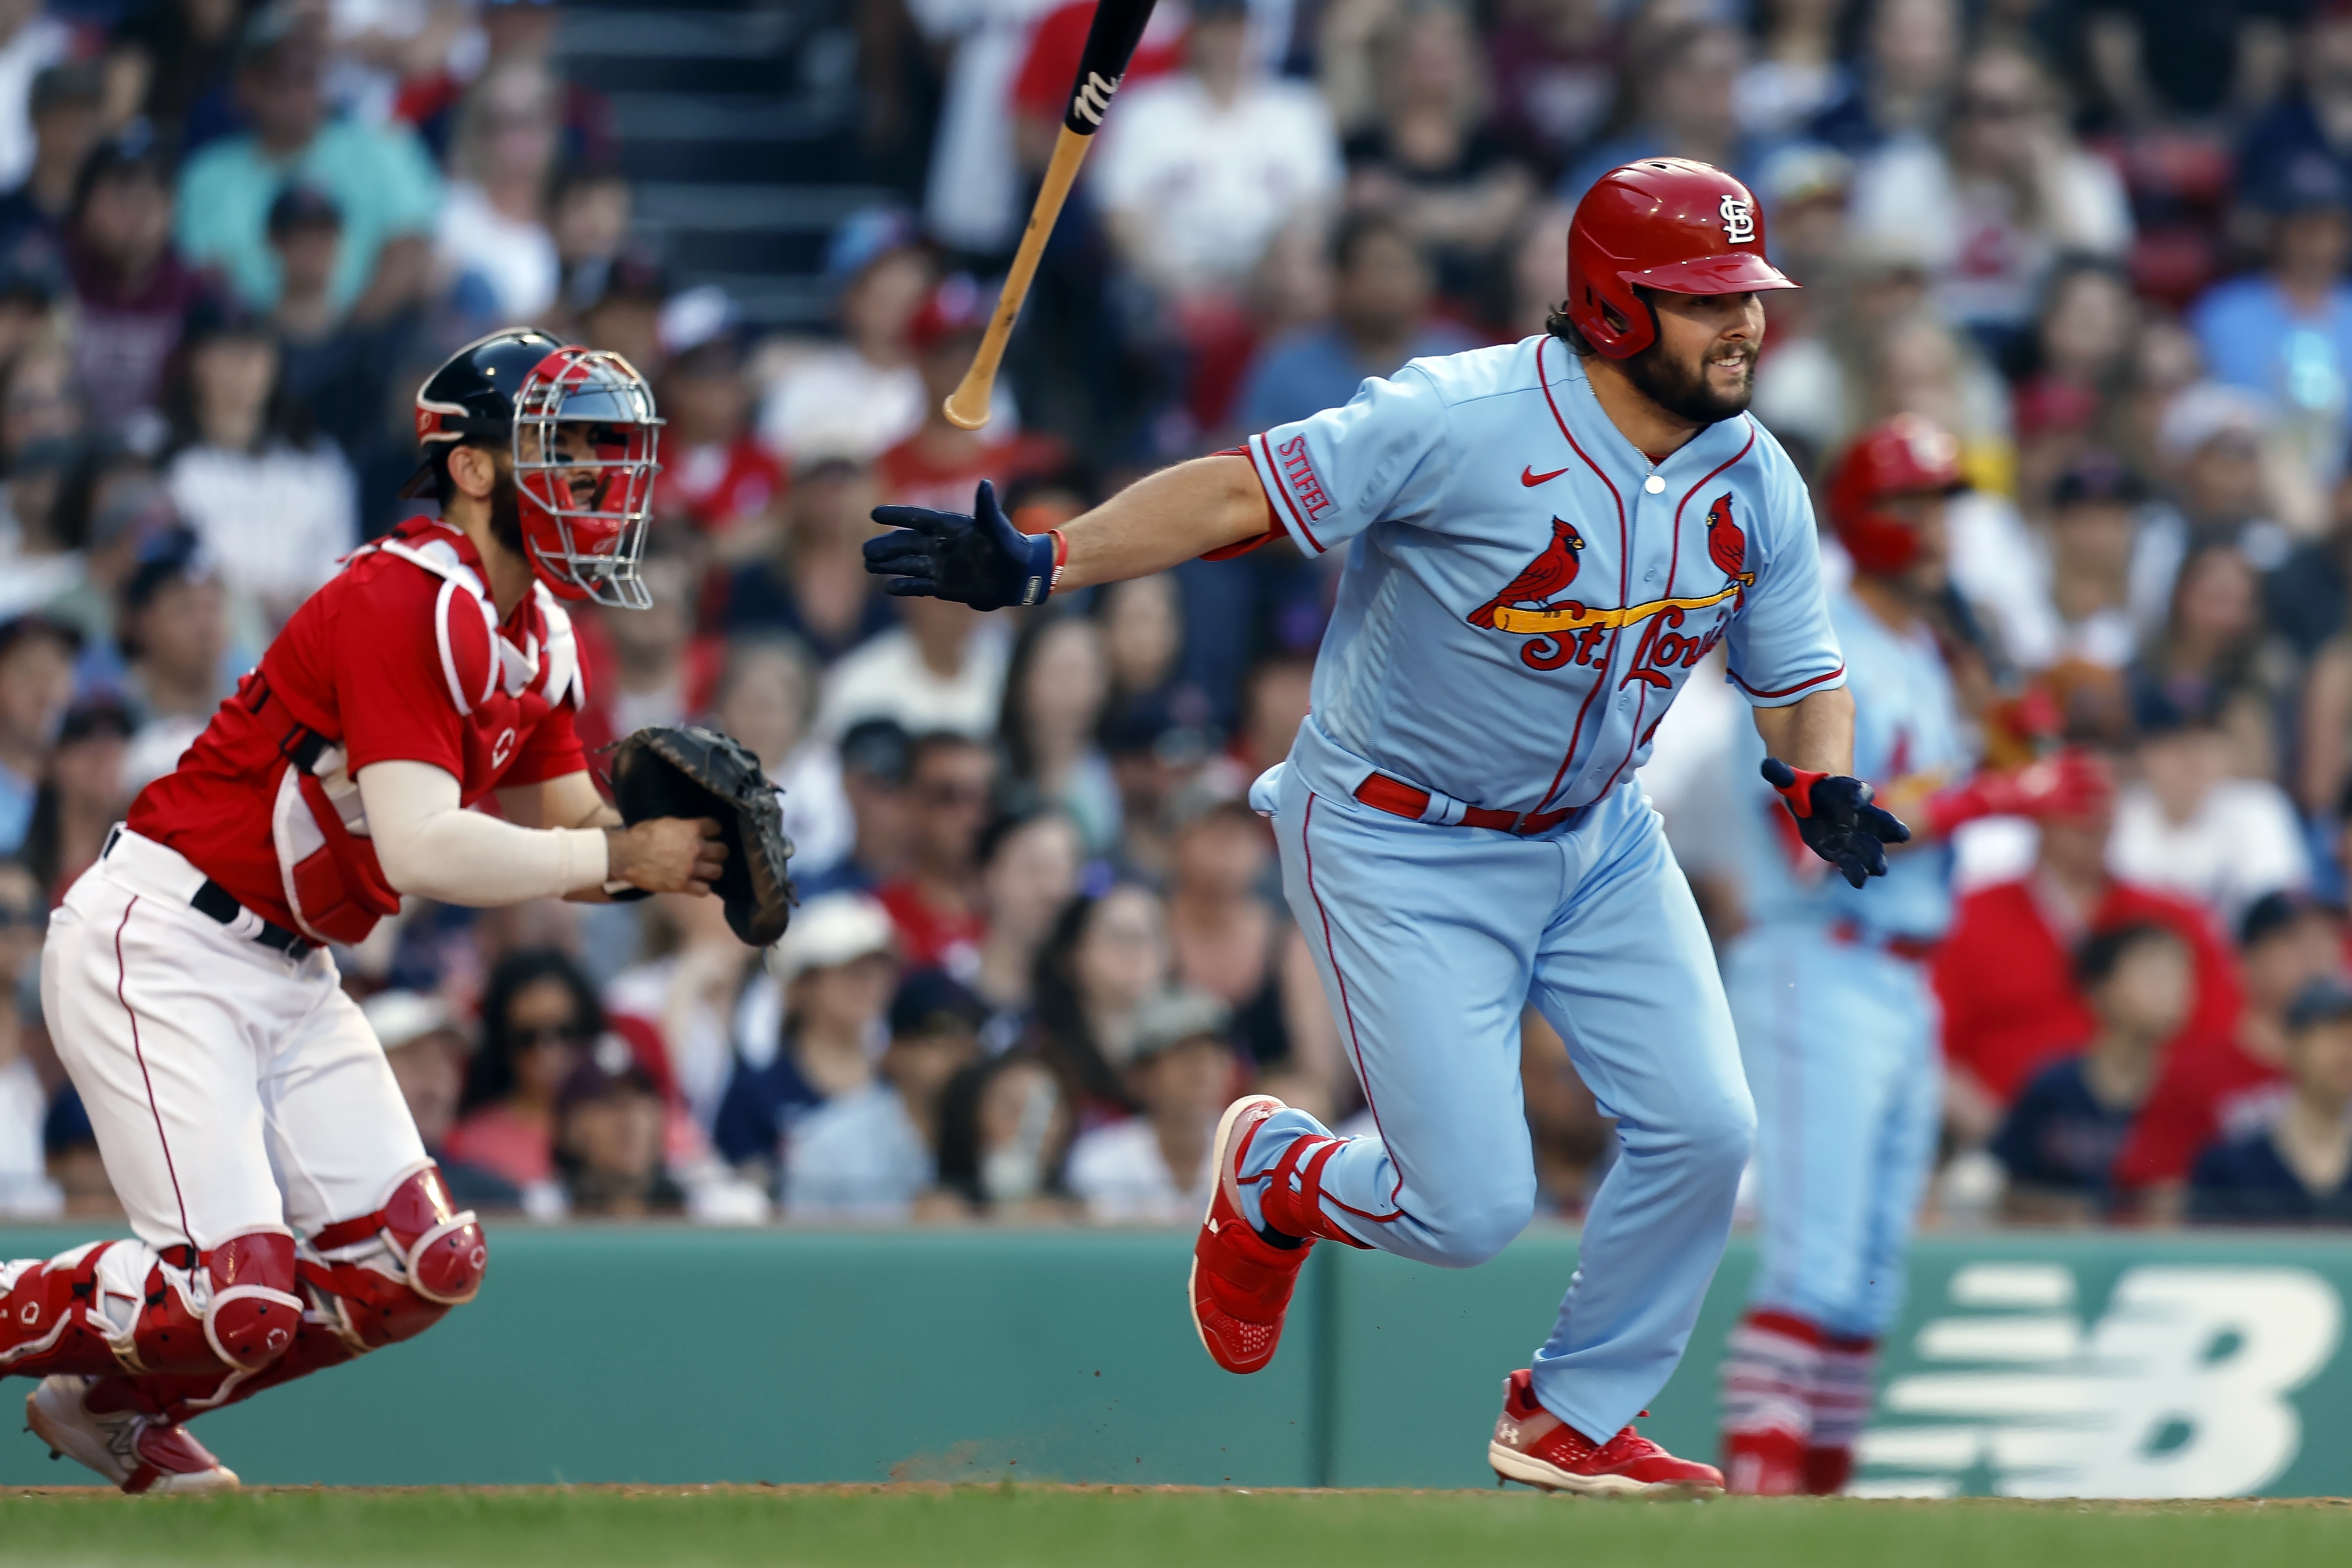 St. Louis Cardinals at Boston Red Sox prediction, pick for 5/13